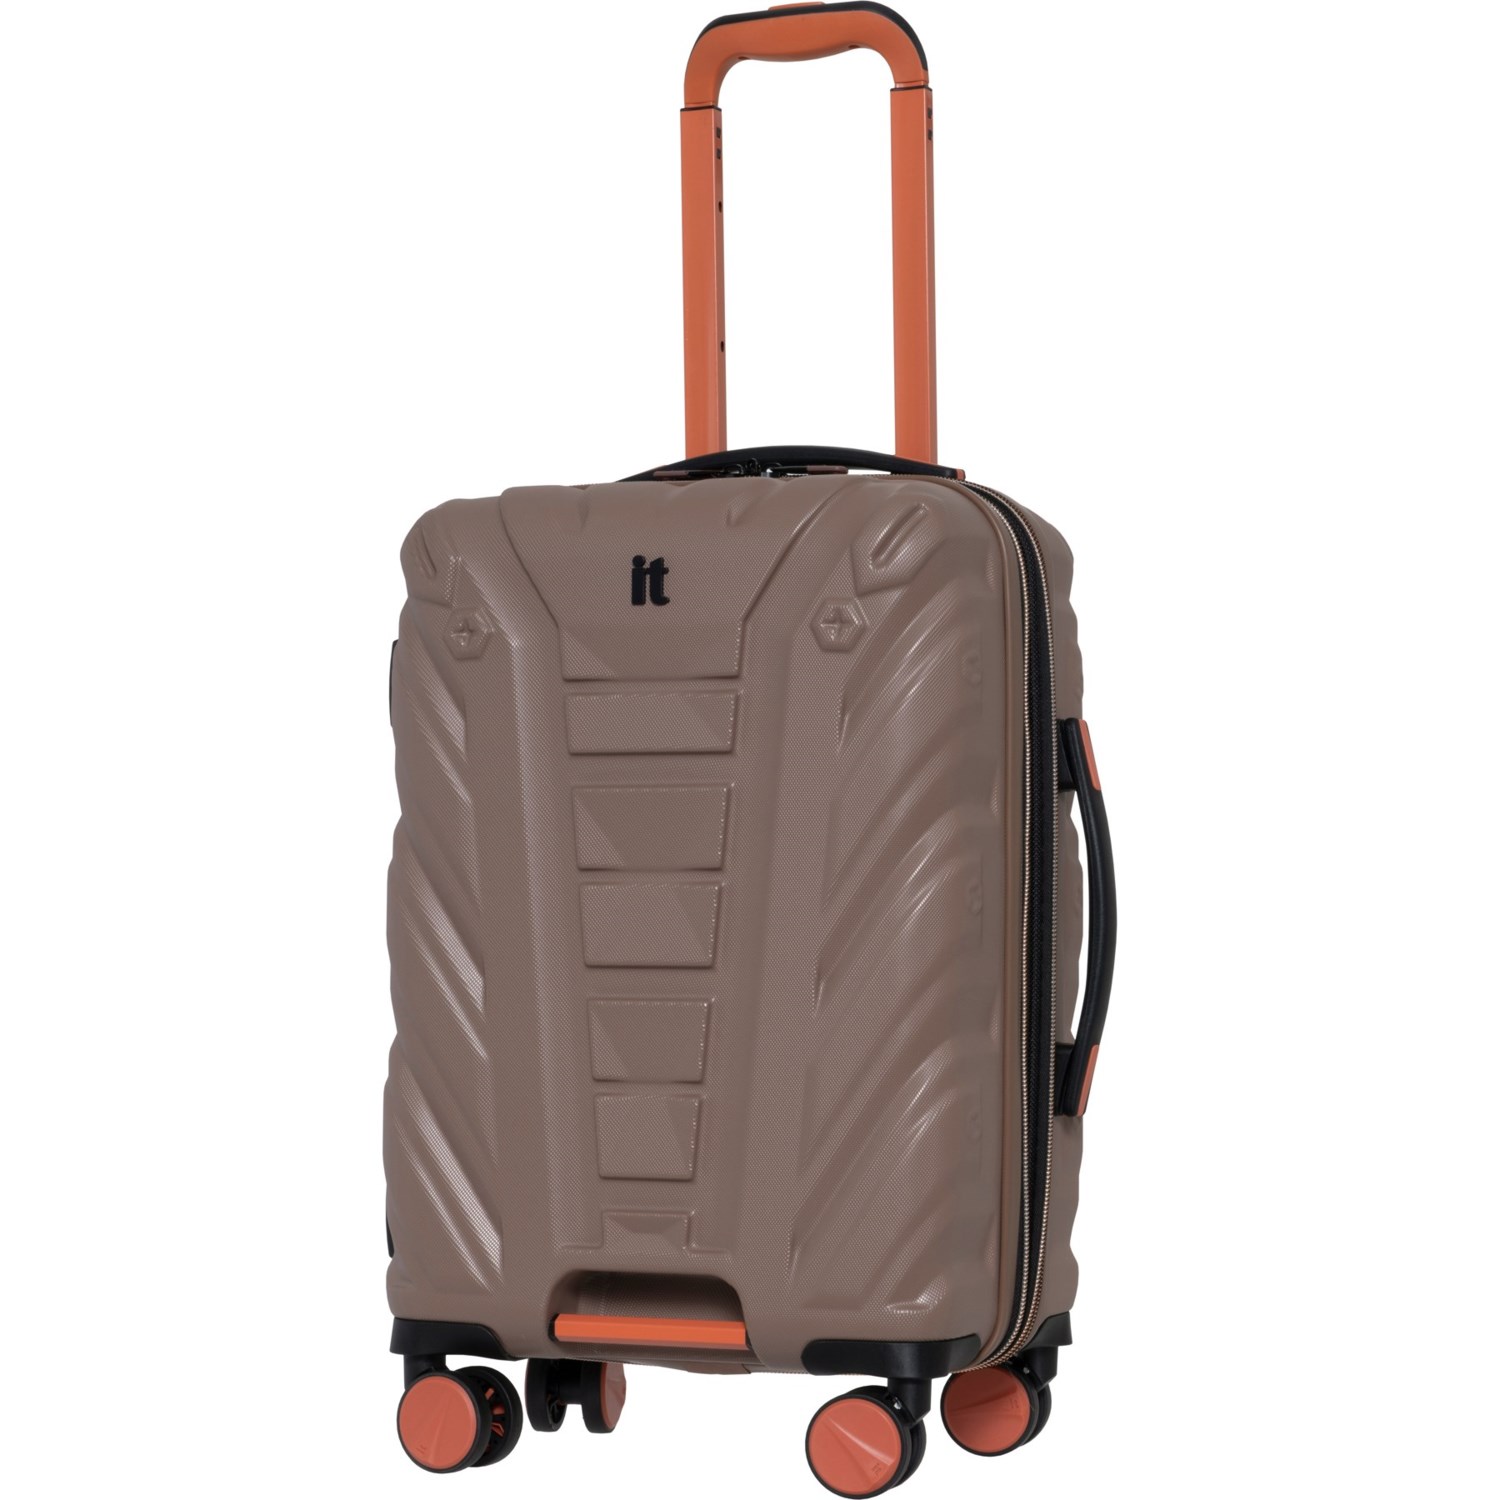 IT Luggage 21.7” Escalate Expedition Spinner Carry-On Suitcase - Hardside, Expandable, Brownie